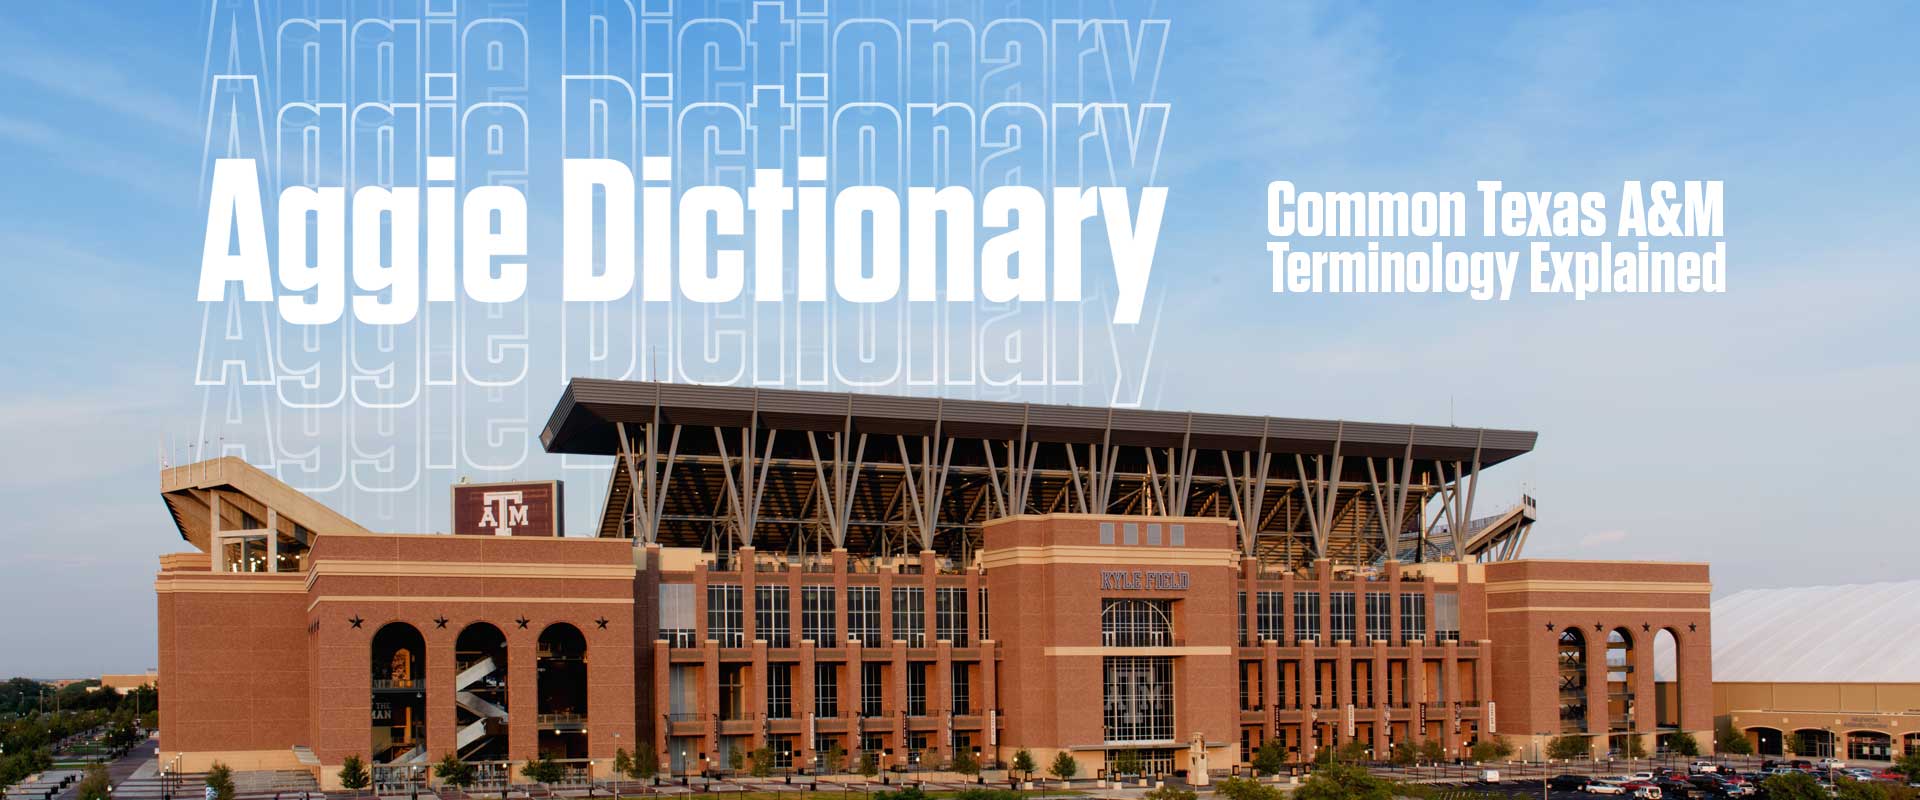 Photo of Kyle Field with text "Aggie Dictionary Common Texas A&M terminology explained"